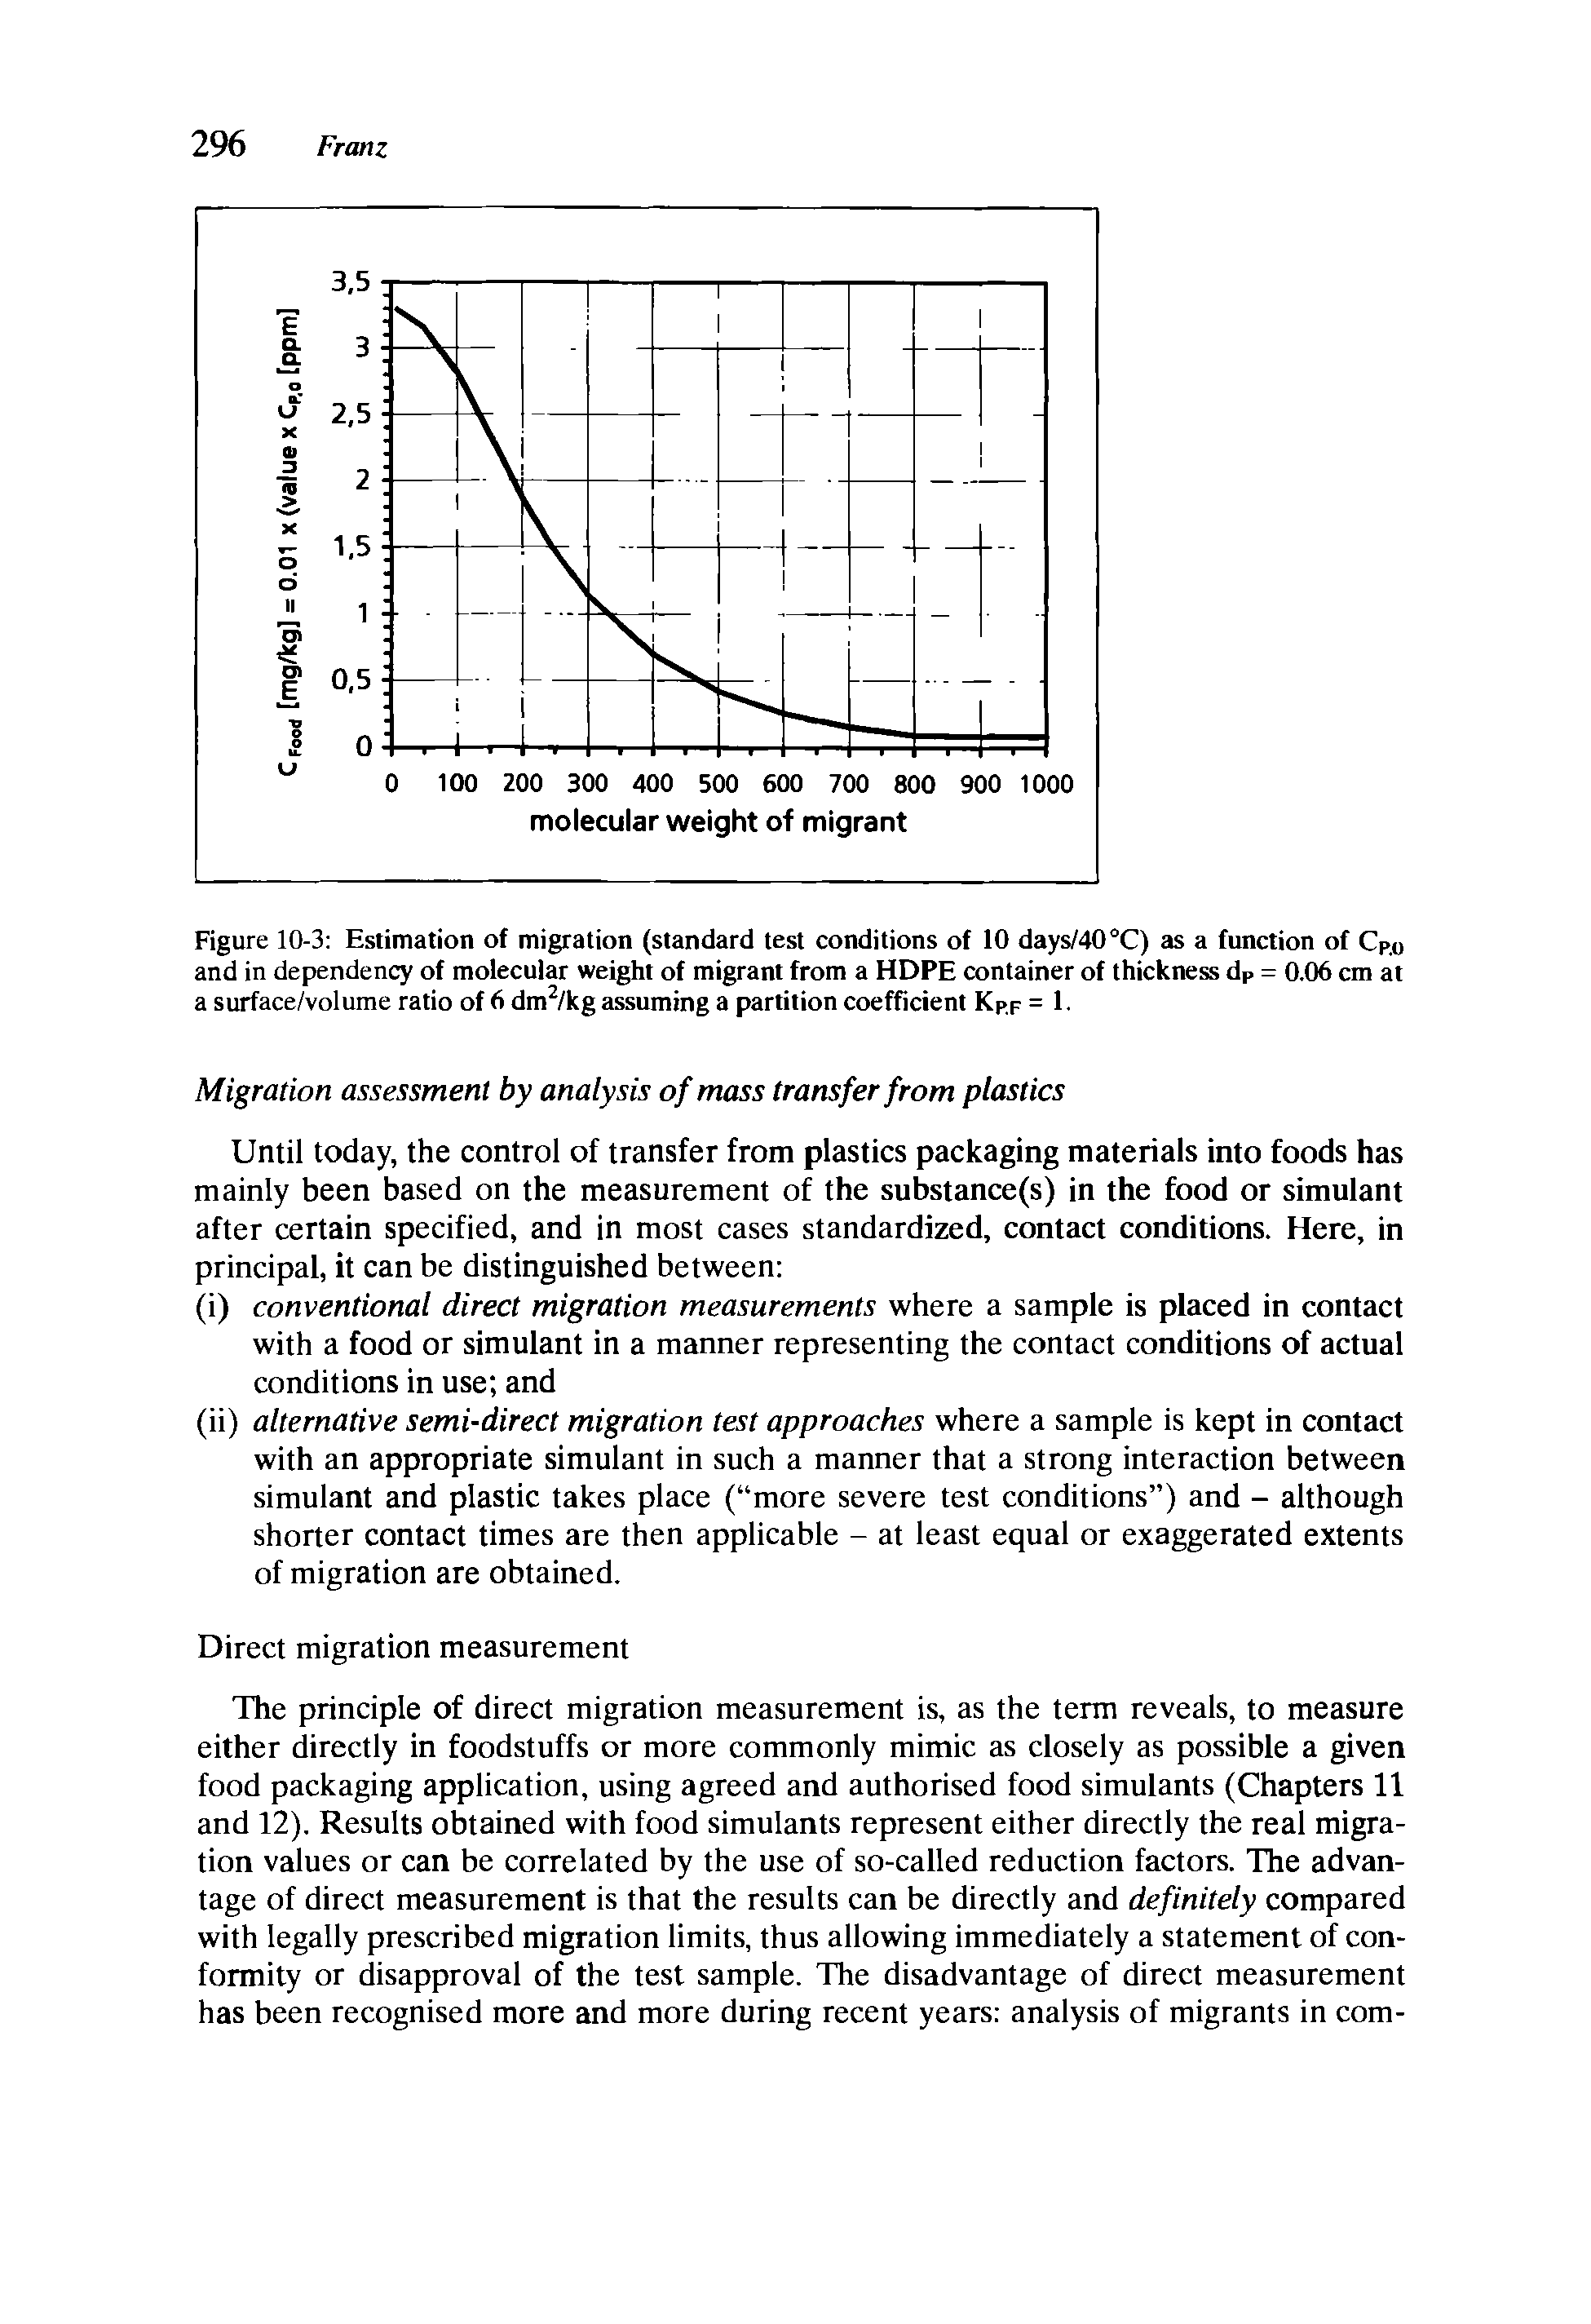 Figure 10-3 Estimation of migration (standard test conditions of 10 days/40°C) as a function of Cp0 and in dependency of molecular weight of migrant from a HDPE container of thickness dP = 0.06 cm at a surface/volume ratio of 6 dm2/kg assuming a partition coefficient KPp = 1.